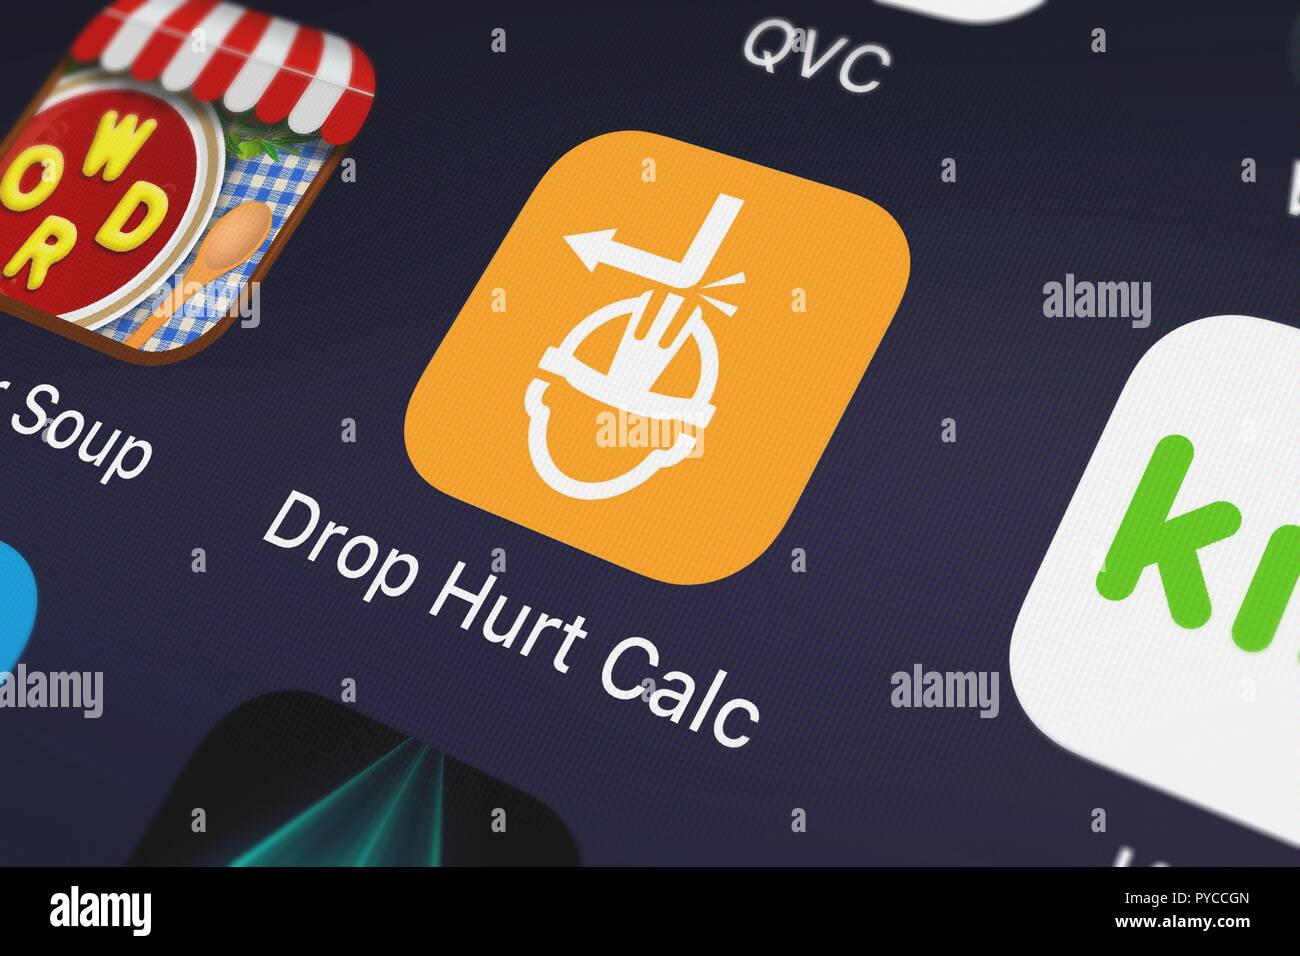 London, United Kingdom - October 26, 2018: Screenshot of the Drop Hurt Calc mobile app from Exxon Mobil Corporation icon on an iPhone. Stock Photo